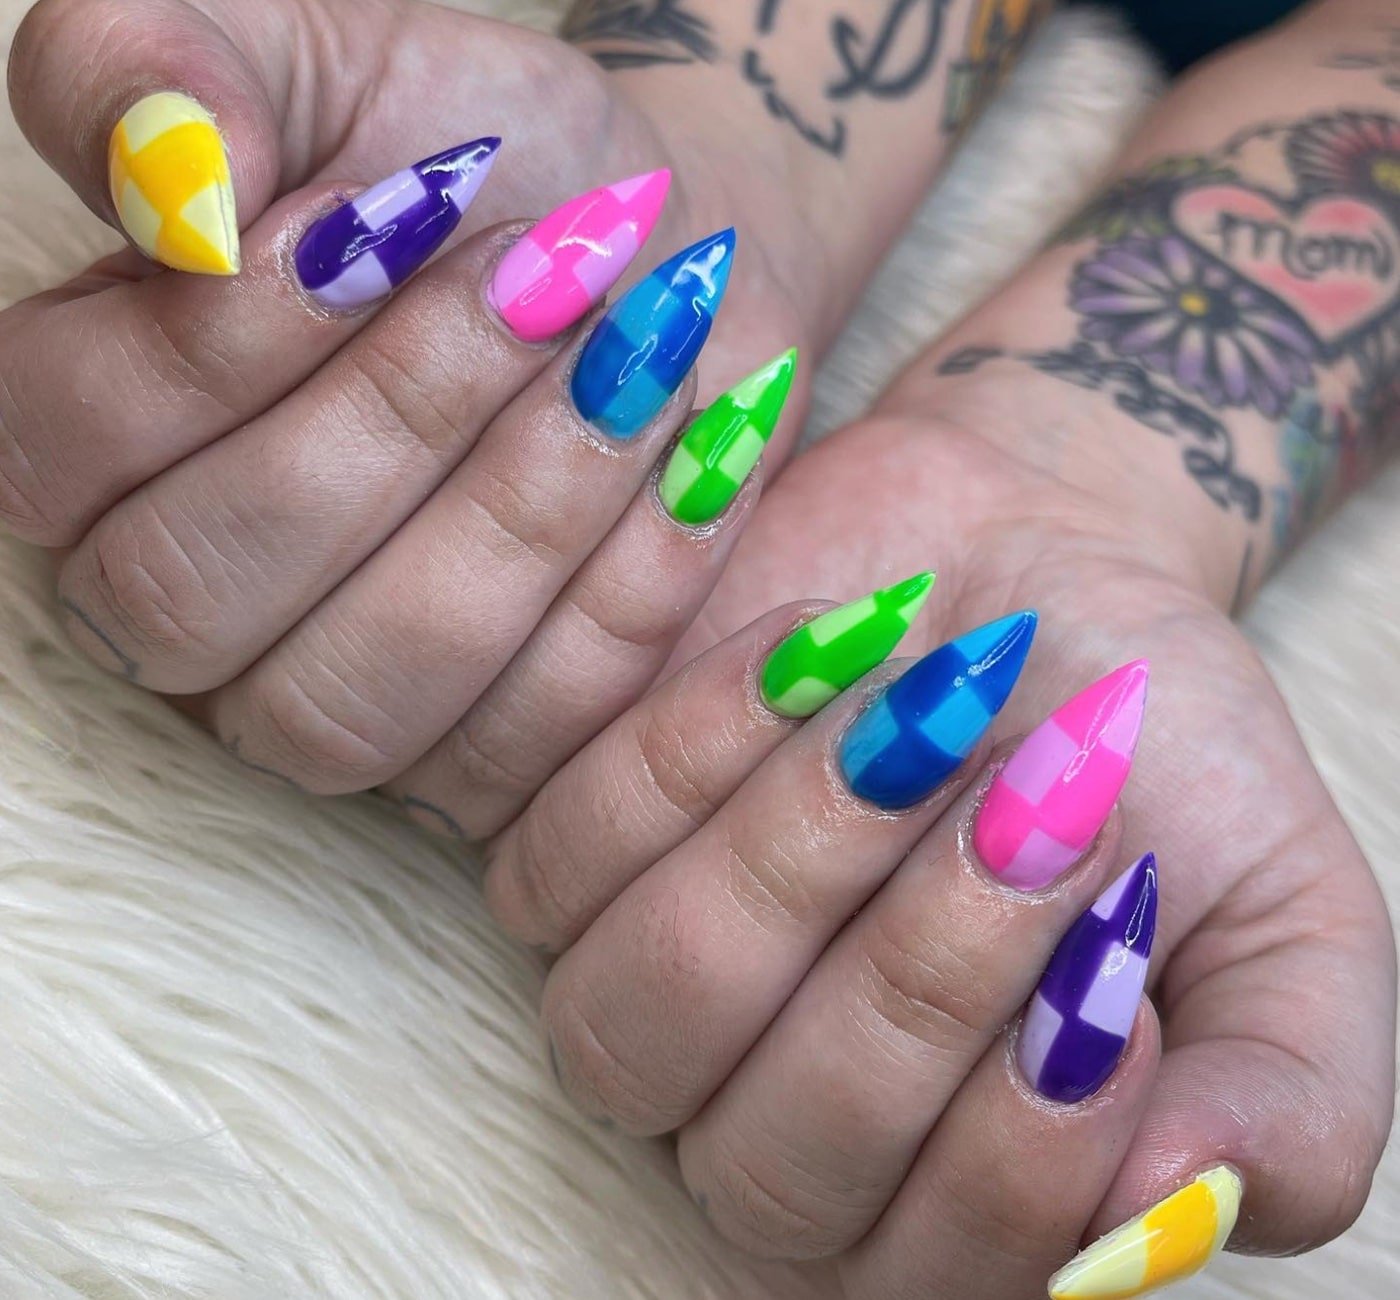 Nails with a checker patter n on them and each nail is a different color tone. So the thumb is two shades of yellow and the pointer is two shades of purple and so on.